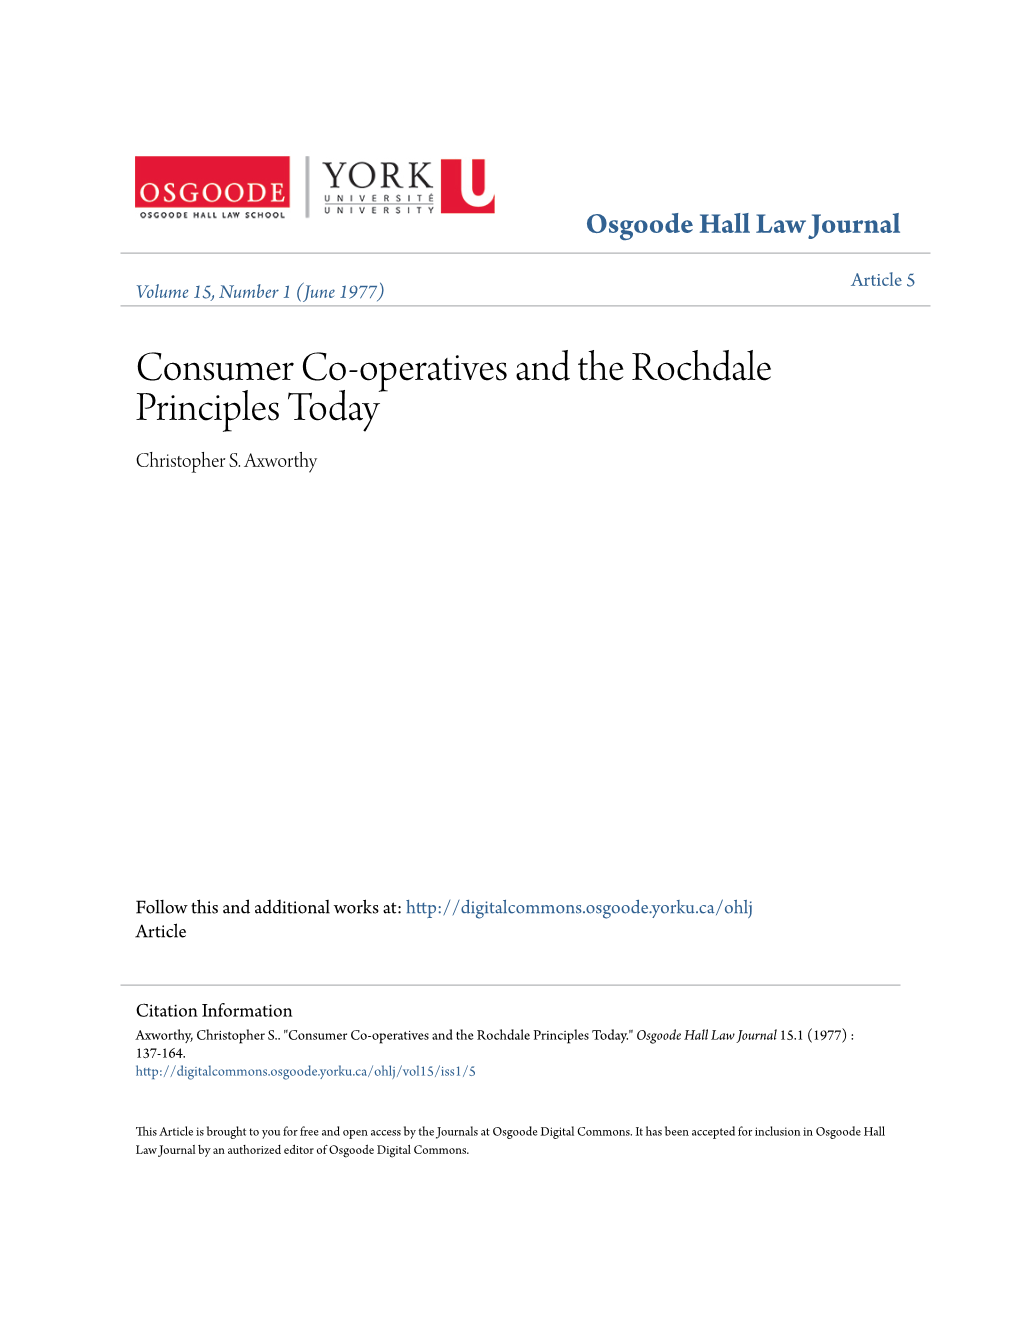 Consumer Co-Operatives and the Rochdale Principles Today Christopher S